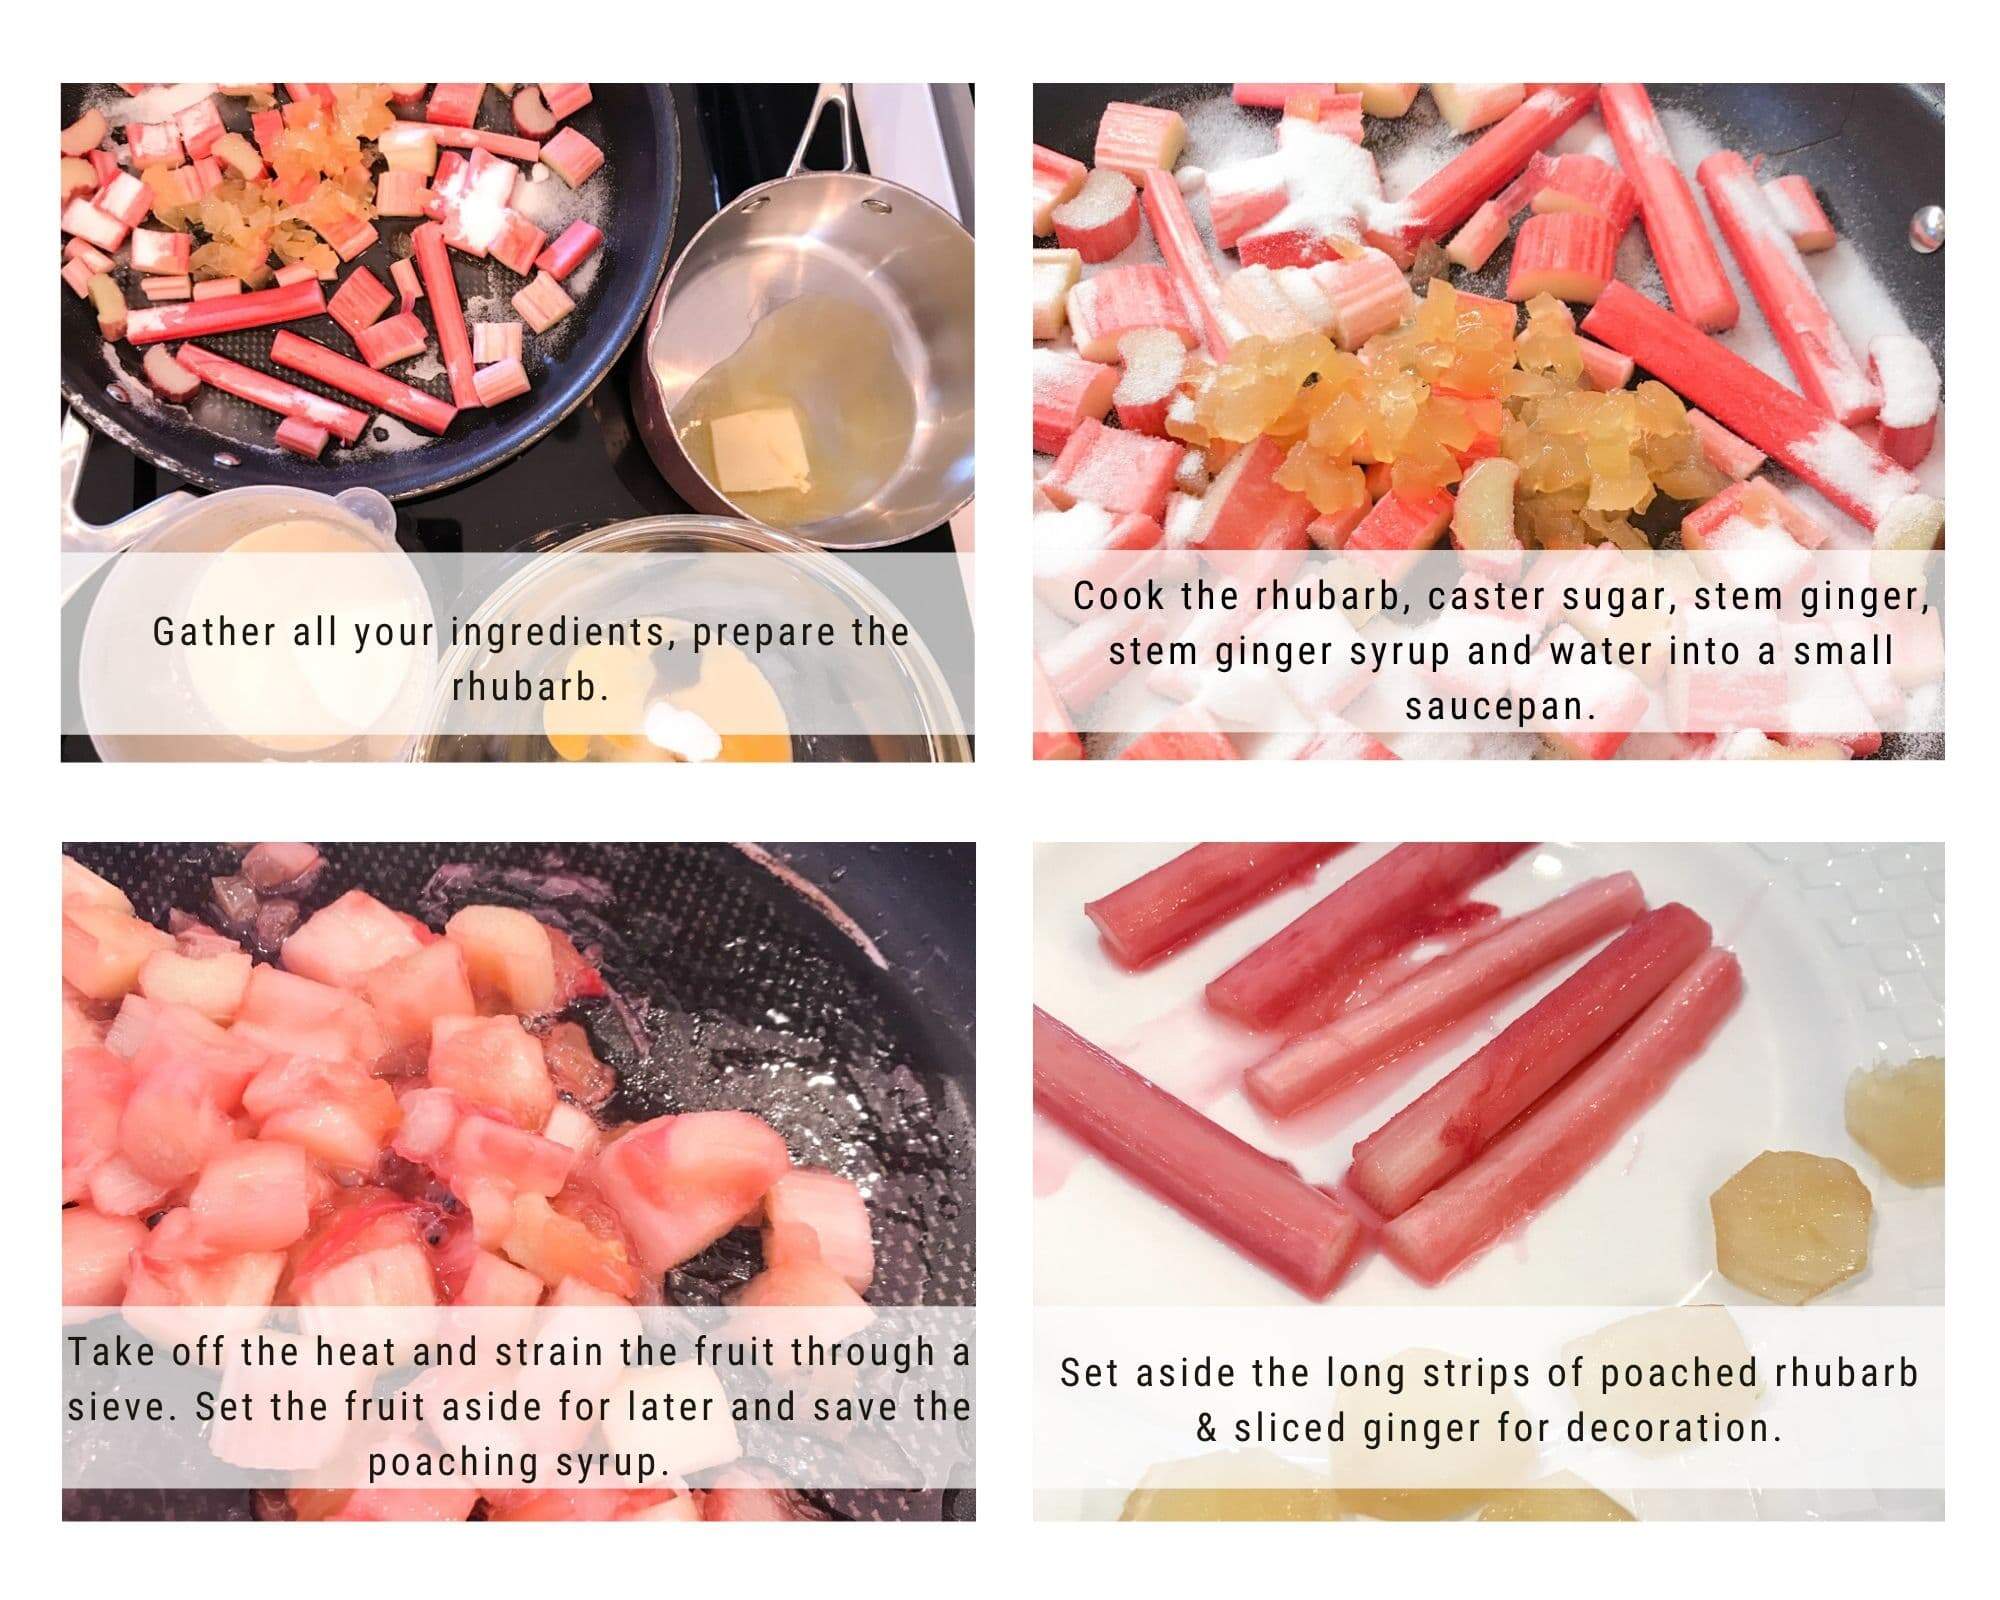 A collage of process images to show how to make a batter for clafoutis and decorate for a finished rhubarb clafoutis dish.